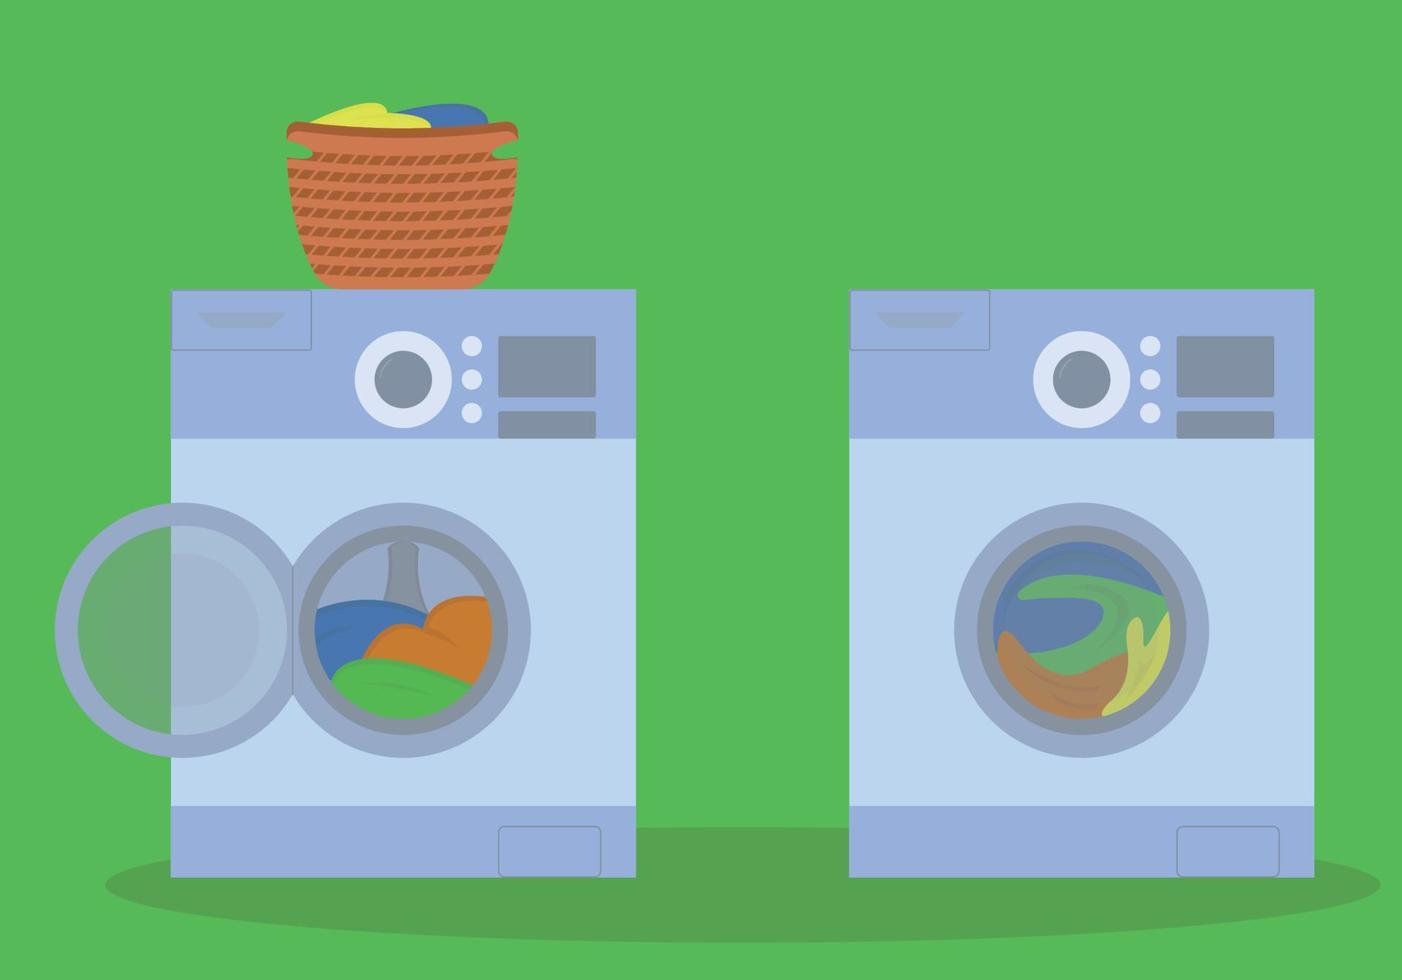 The washing machine is loaded with laundry. The washing machine is working. The laundry basket is on top. Vector set of illustrations